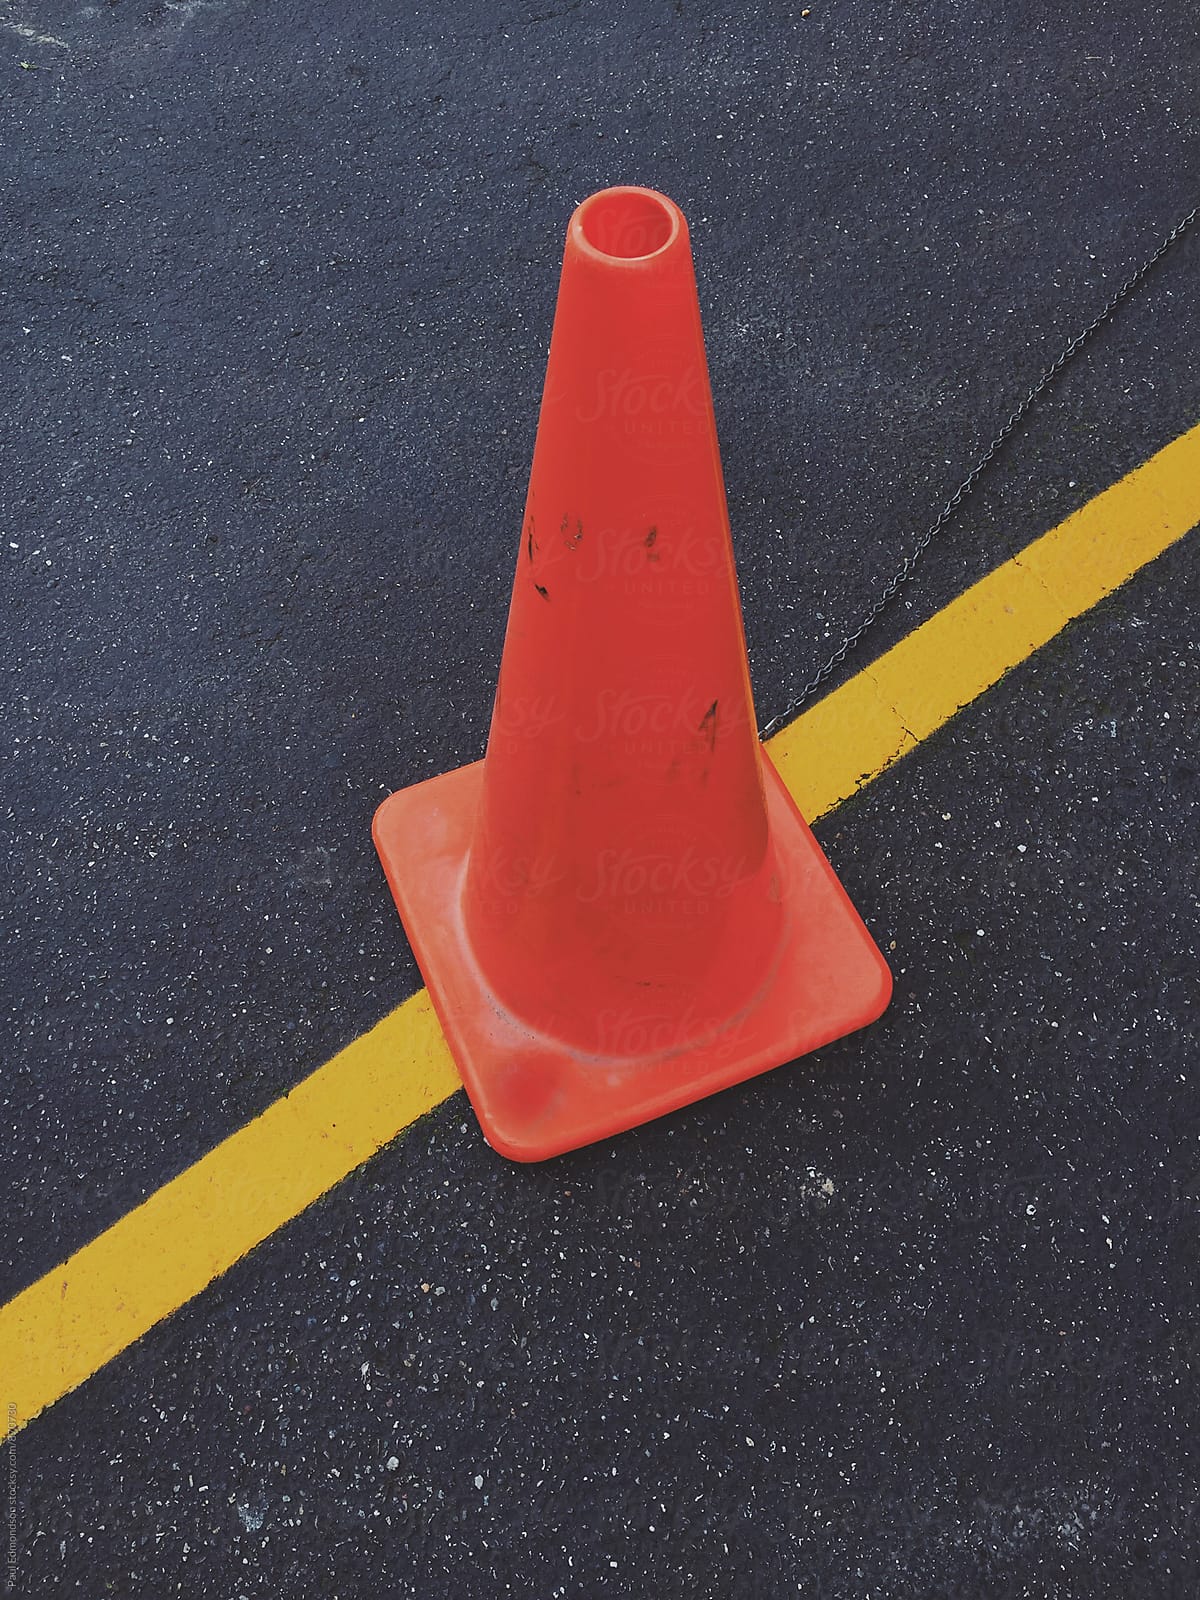 Traffic cone and yellow boundary line on road